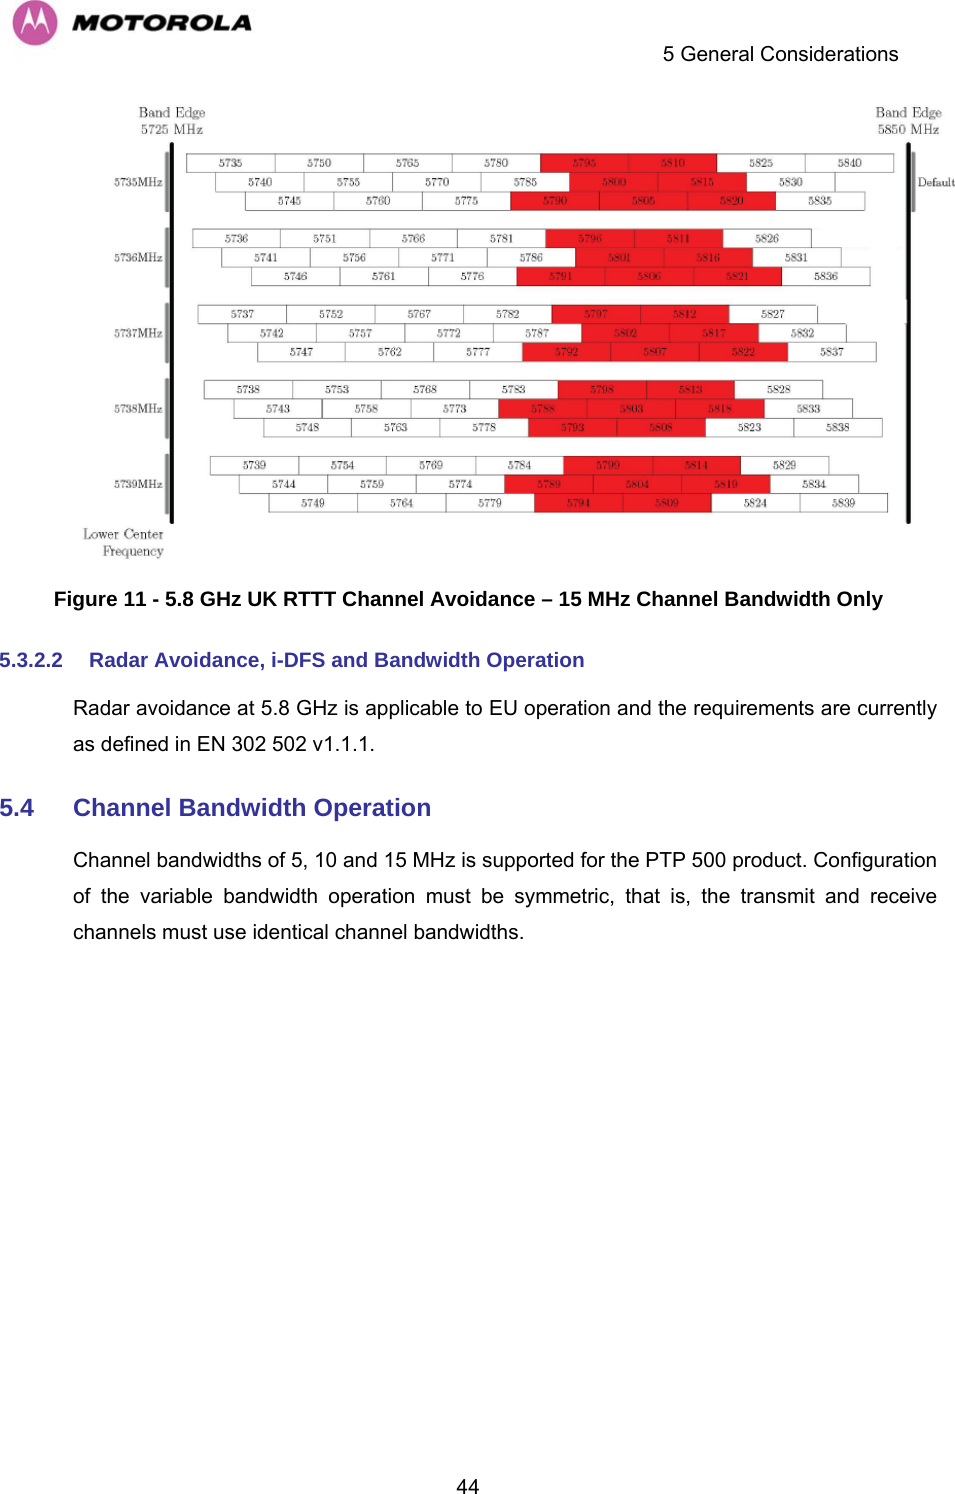    5 General Considerations  44 Figure 11 - 5.8 GHz UK RTTT Channel Avoidance – 15 MHz Channel Bandwidth Only 5.3.2.2  Radar Avoidance, i-DFS and Bandwidth Operation Radar avoidance at 5.8 GHz is applicable to EU operation and the requirements are currently as defined in EN 302 502 v1.1.1. 5.4  Channel Bandwidth Operation Channel bandwidths of 5, 10 and 15 MHz is supported for the PTP 500 product. Configuration of the variable bandwidth operation must be symmetric, that is, the transmit and receive channels must use identical channel bandwidths. 